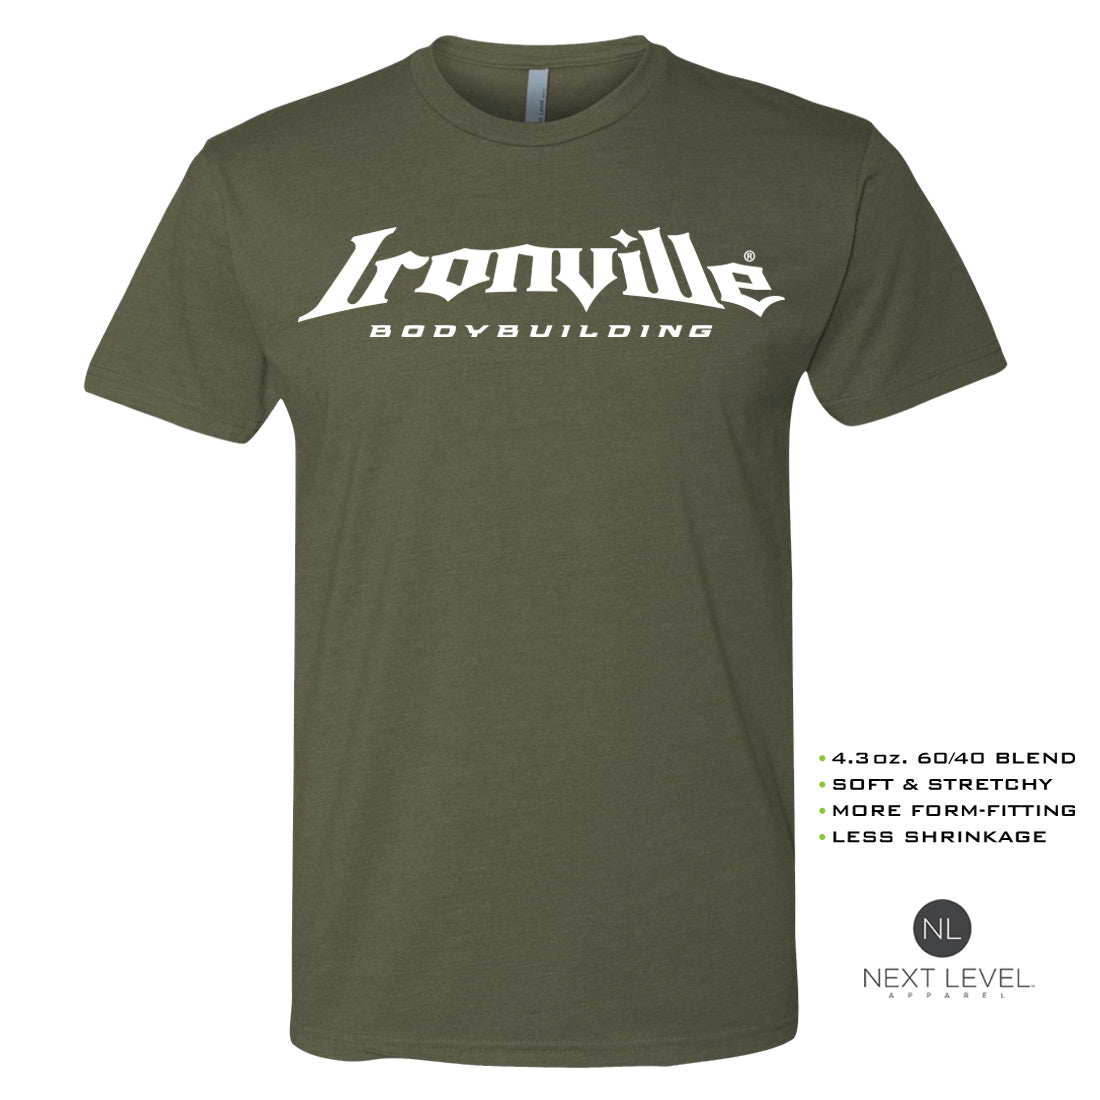 Ironville BODYBUILDING Soft-Blend Fitted Gym T-shirt